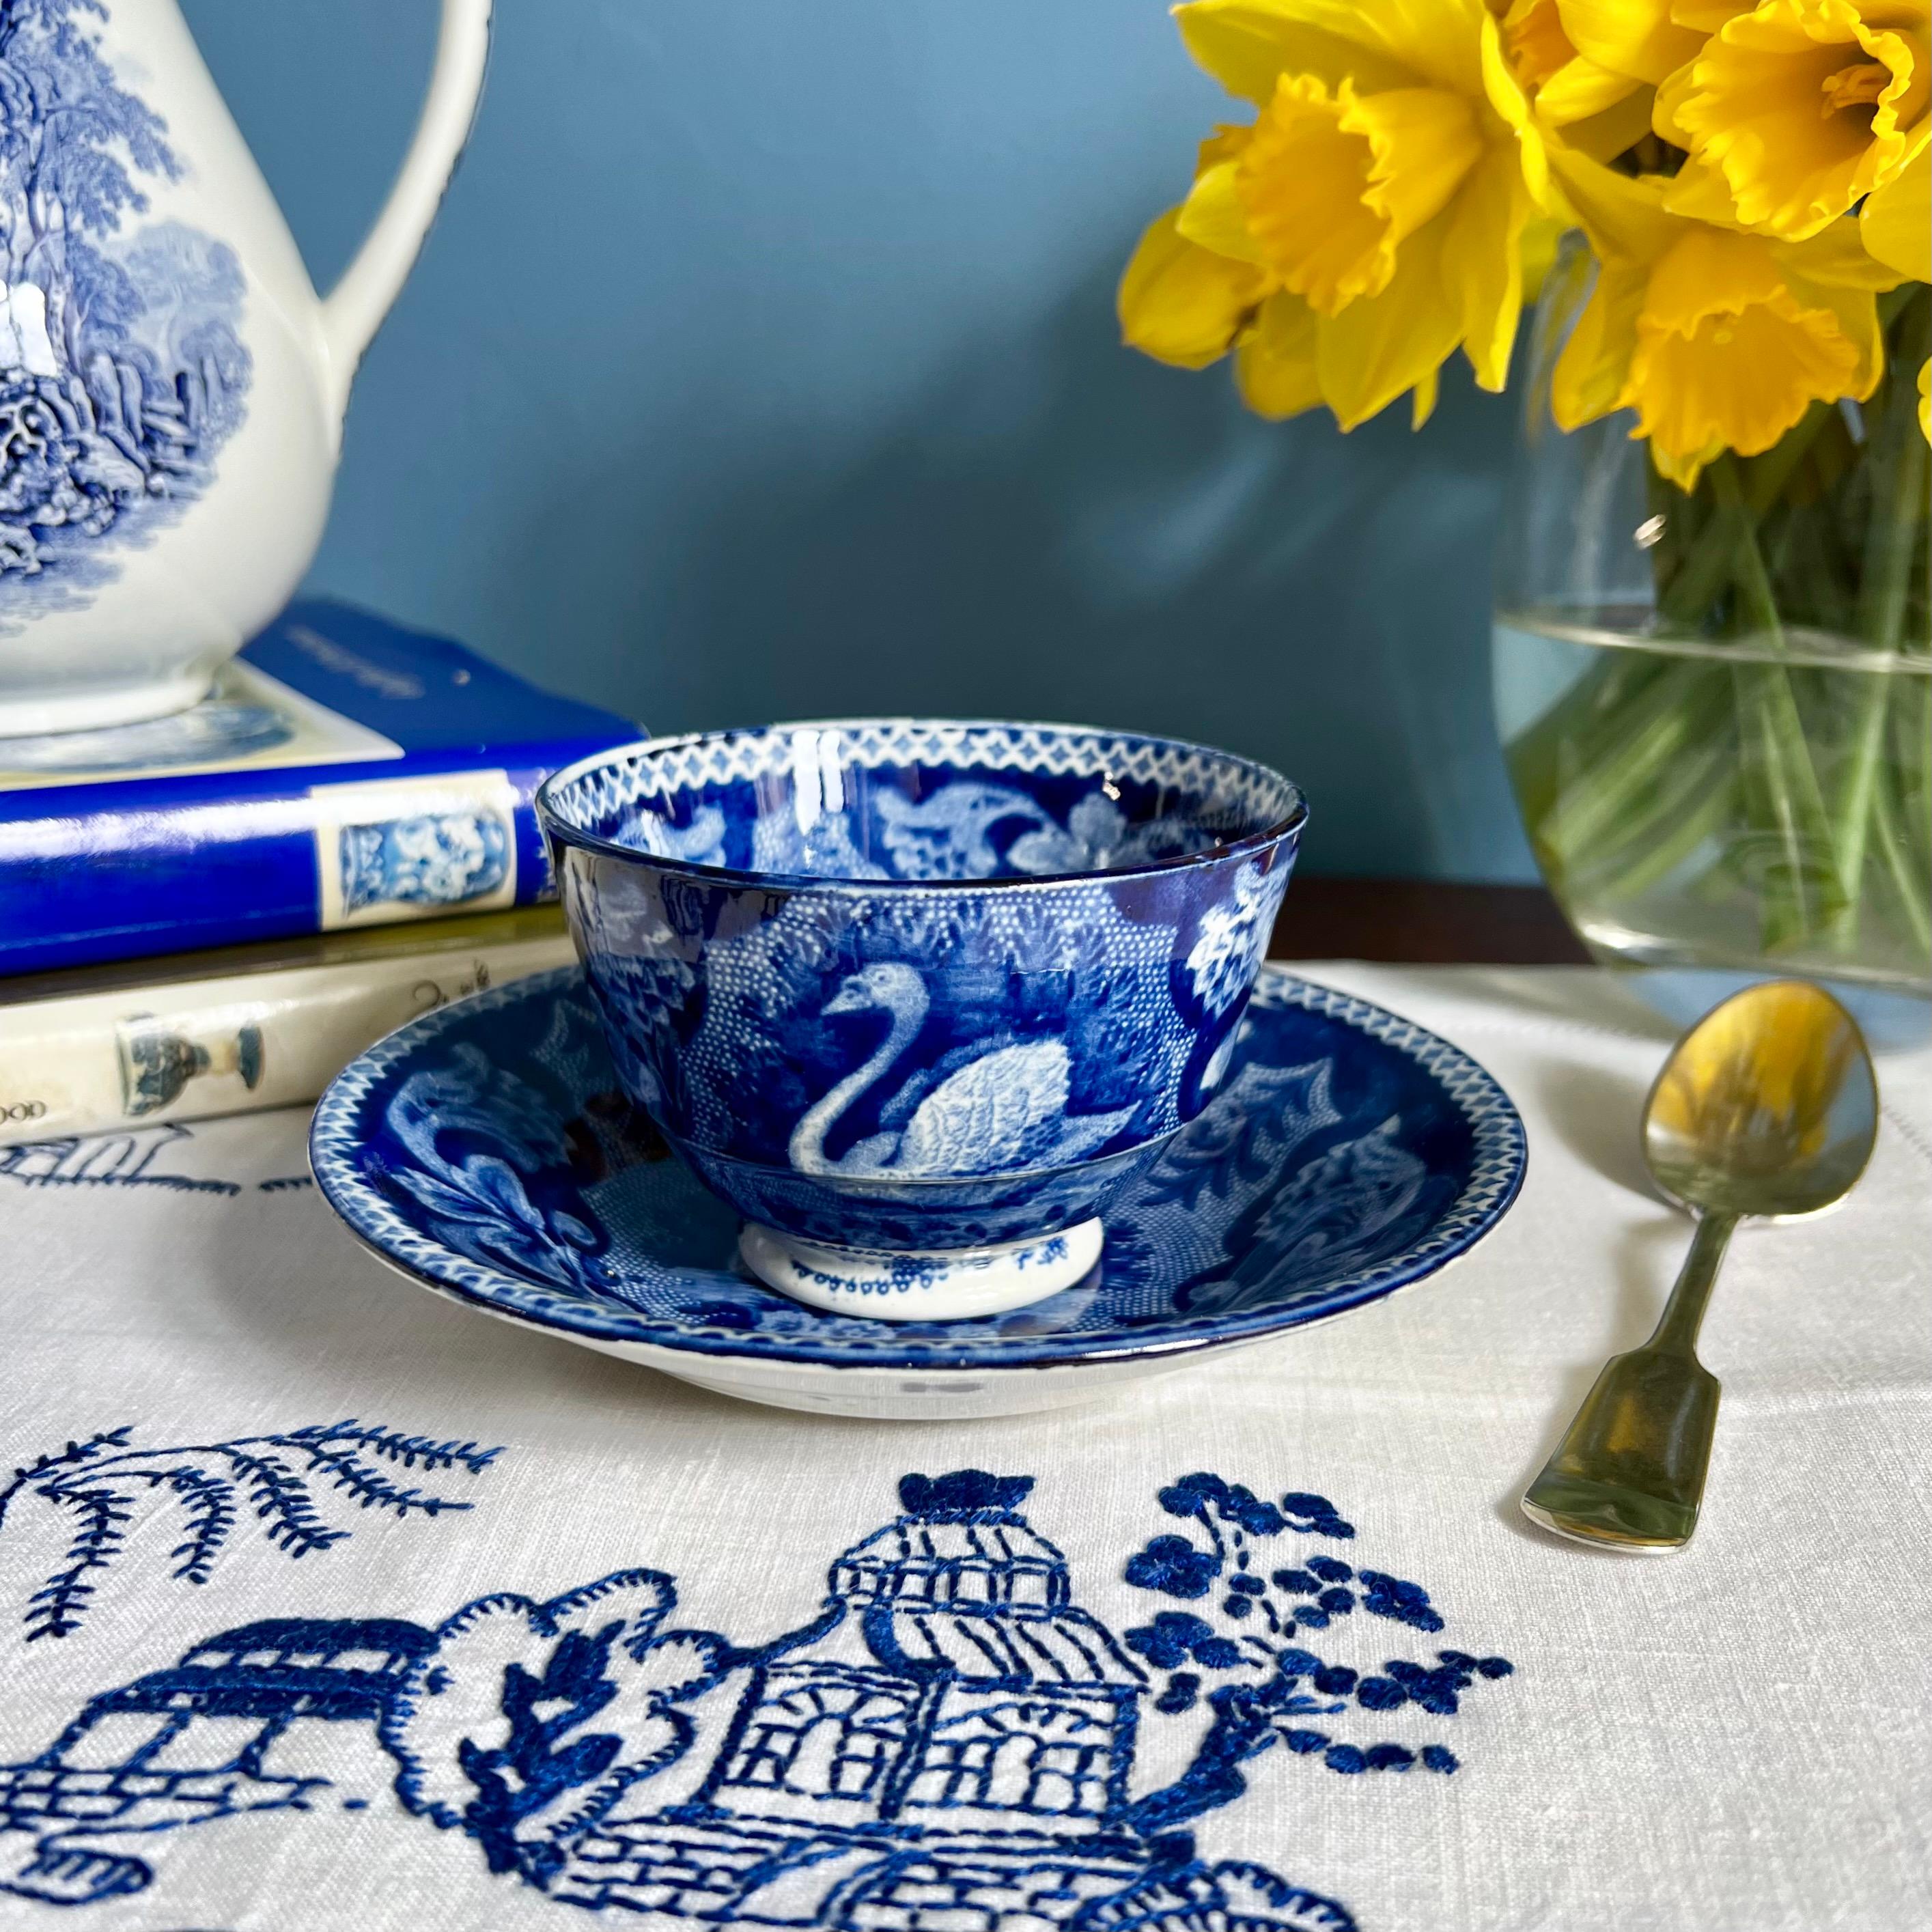 This is a beautiful and very rare tea bowl and saucer made by Joseph Stubbs in about 1825. The bowl is quite large and made of pearlware, and has a beautiful transfer printed blue and white pattern of a swan with acanthus details in the rims.

The